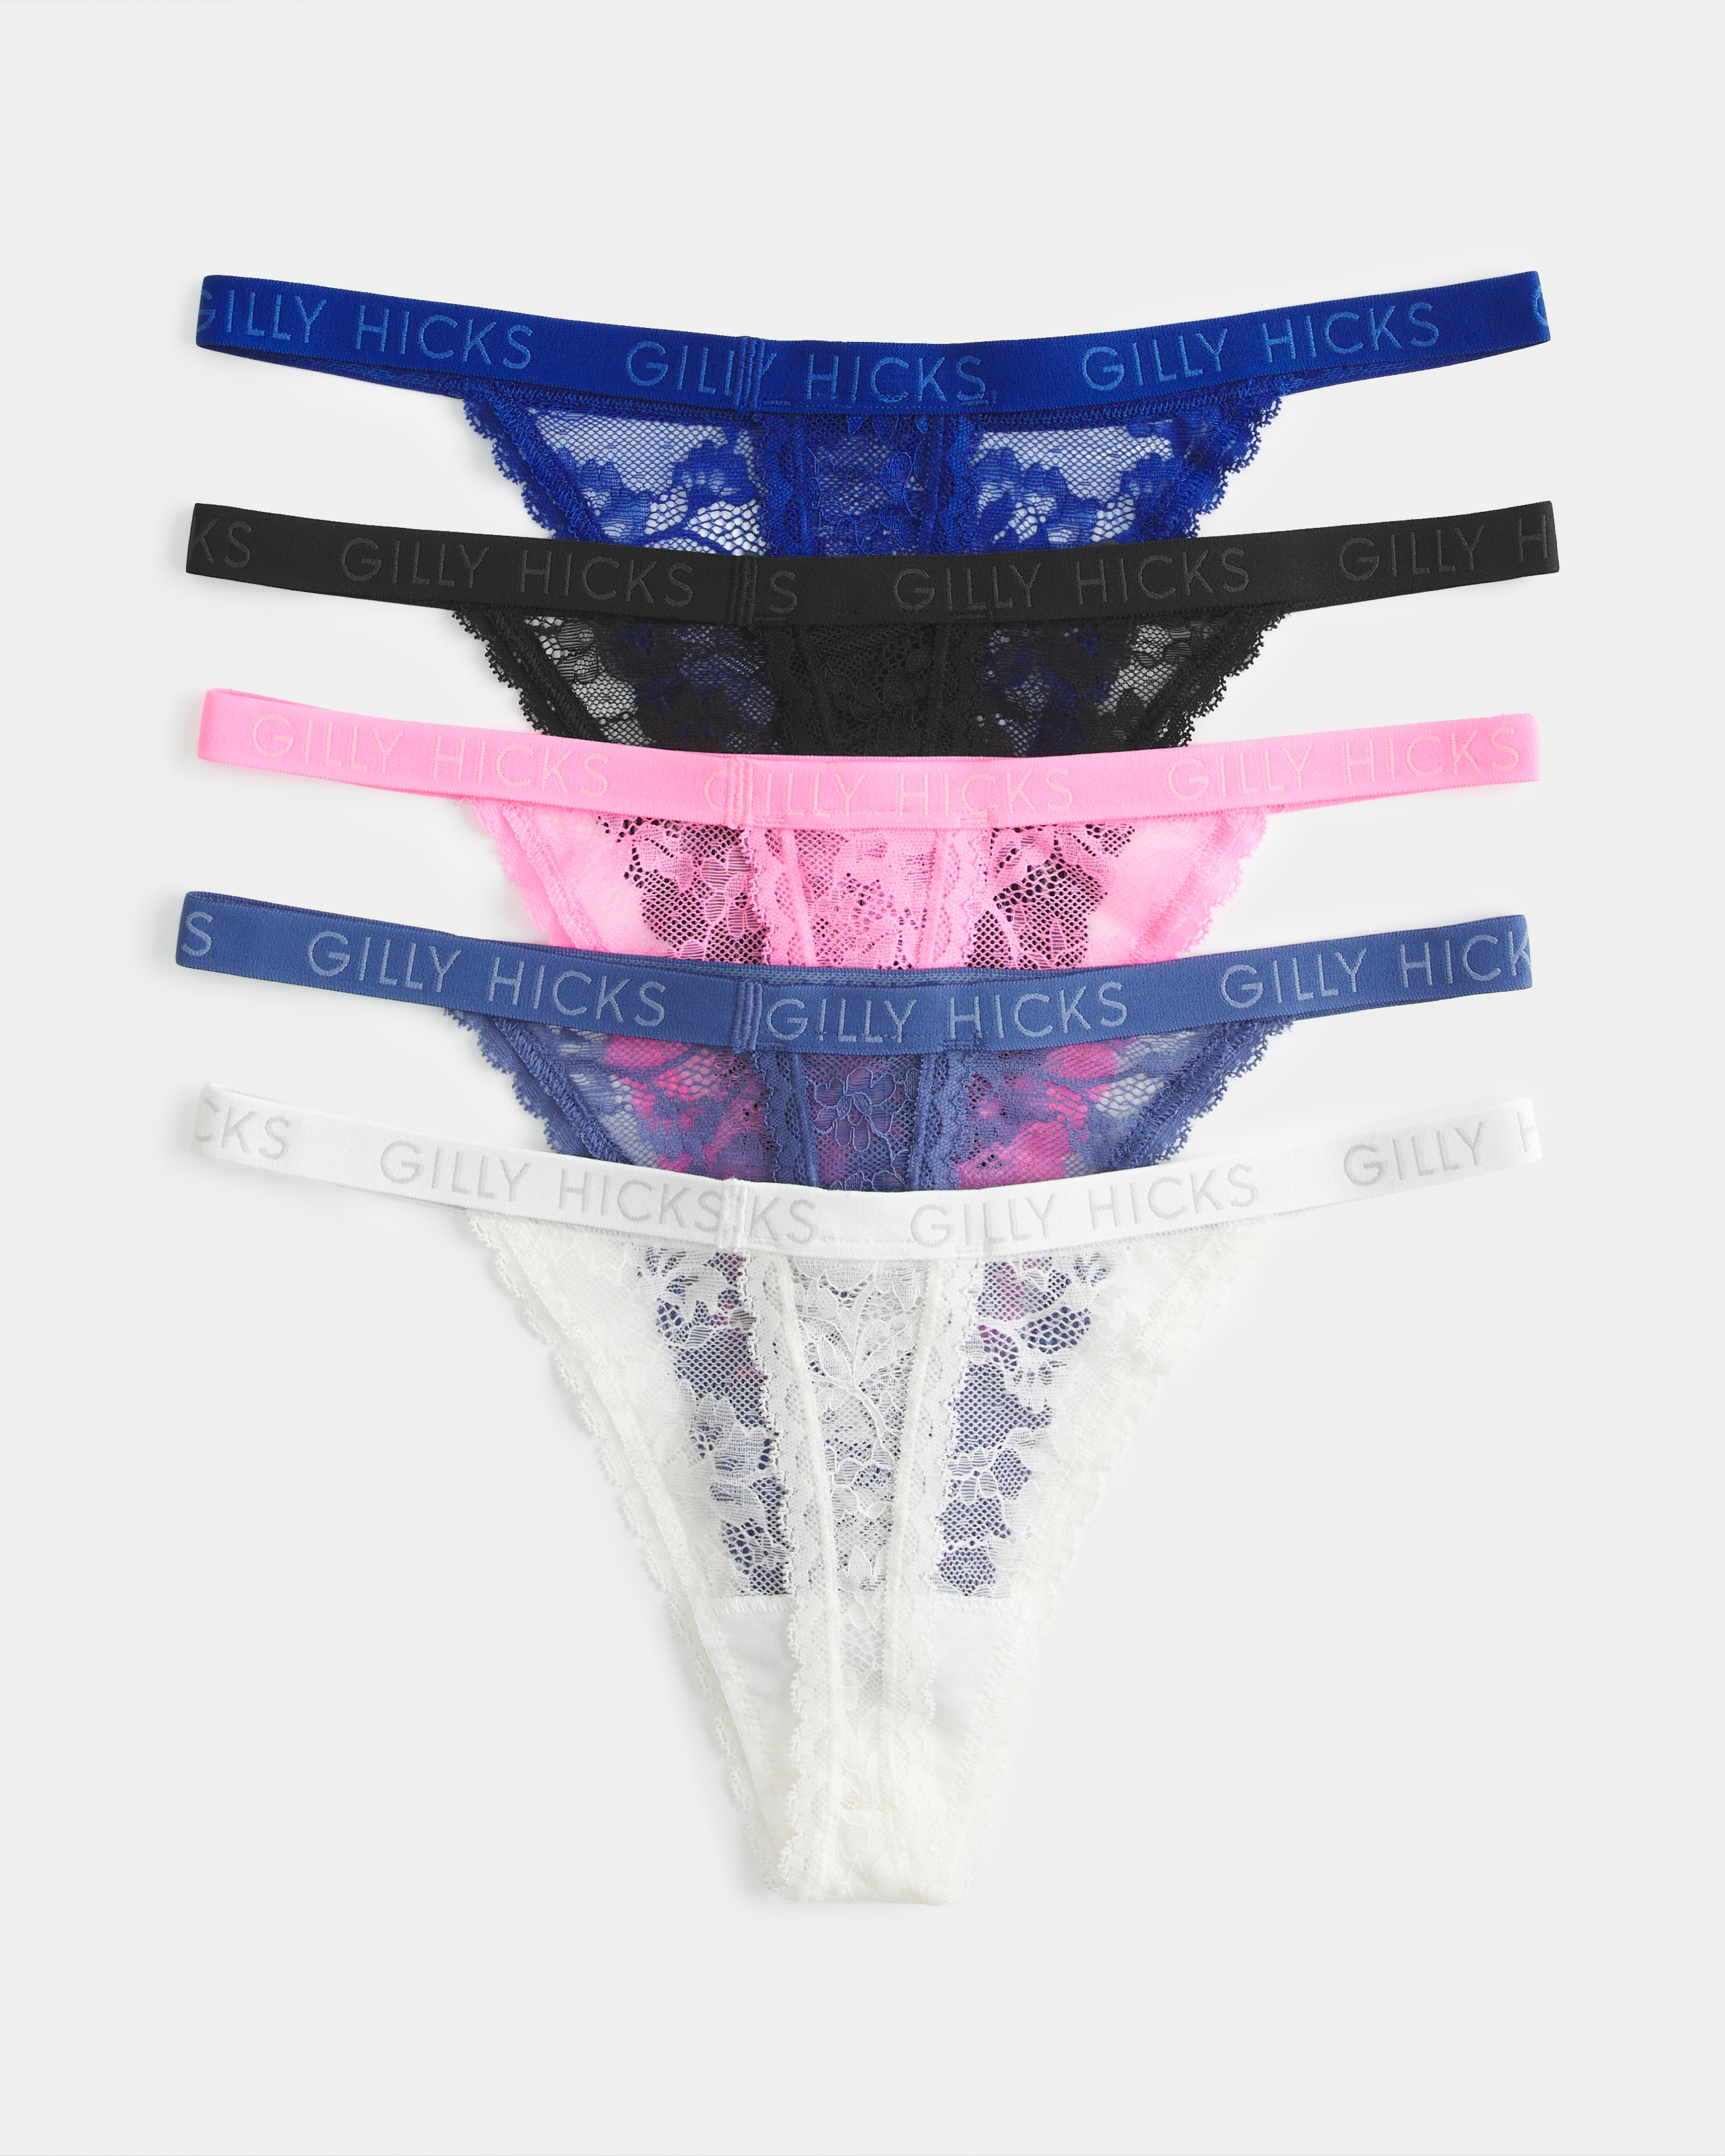 Gilly Hicks Lace Thong Underwear 5-Pack